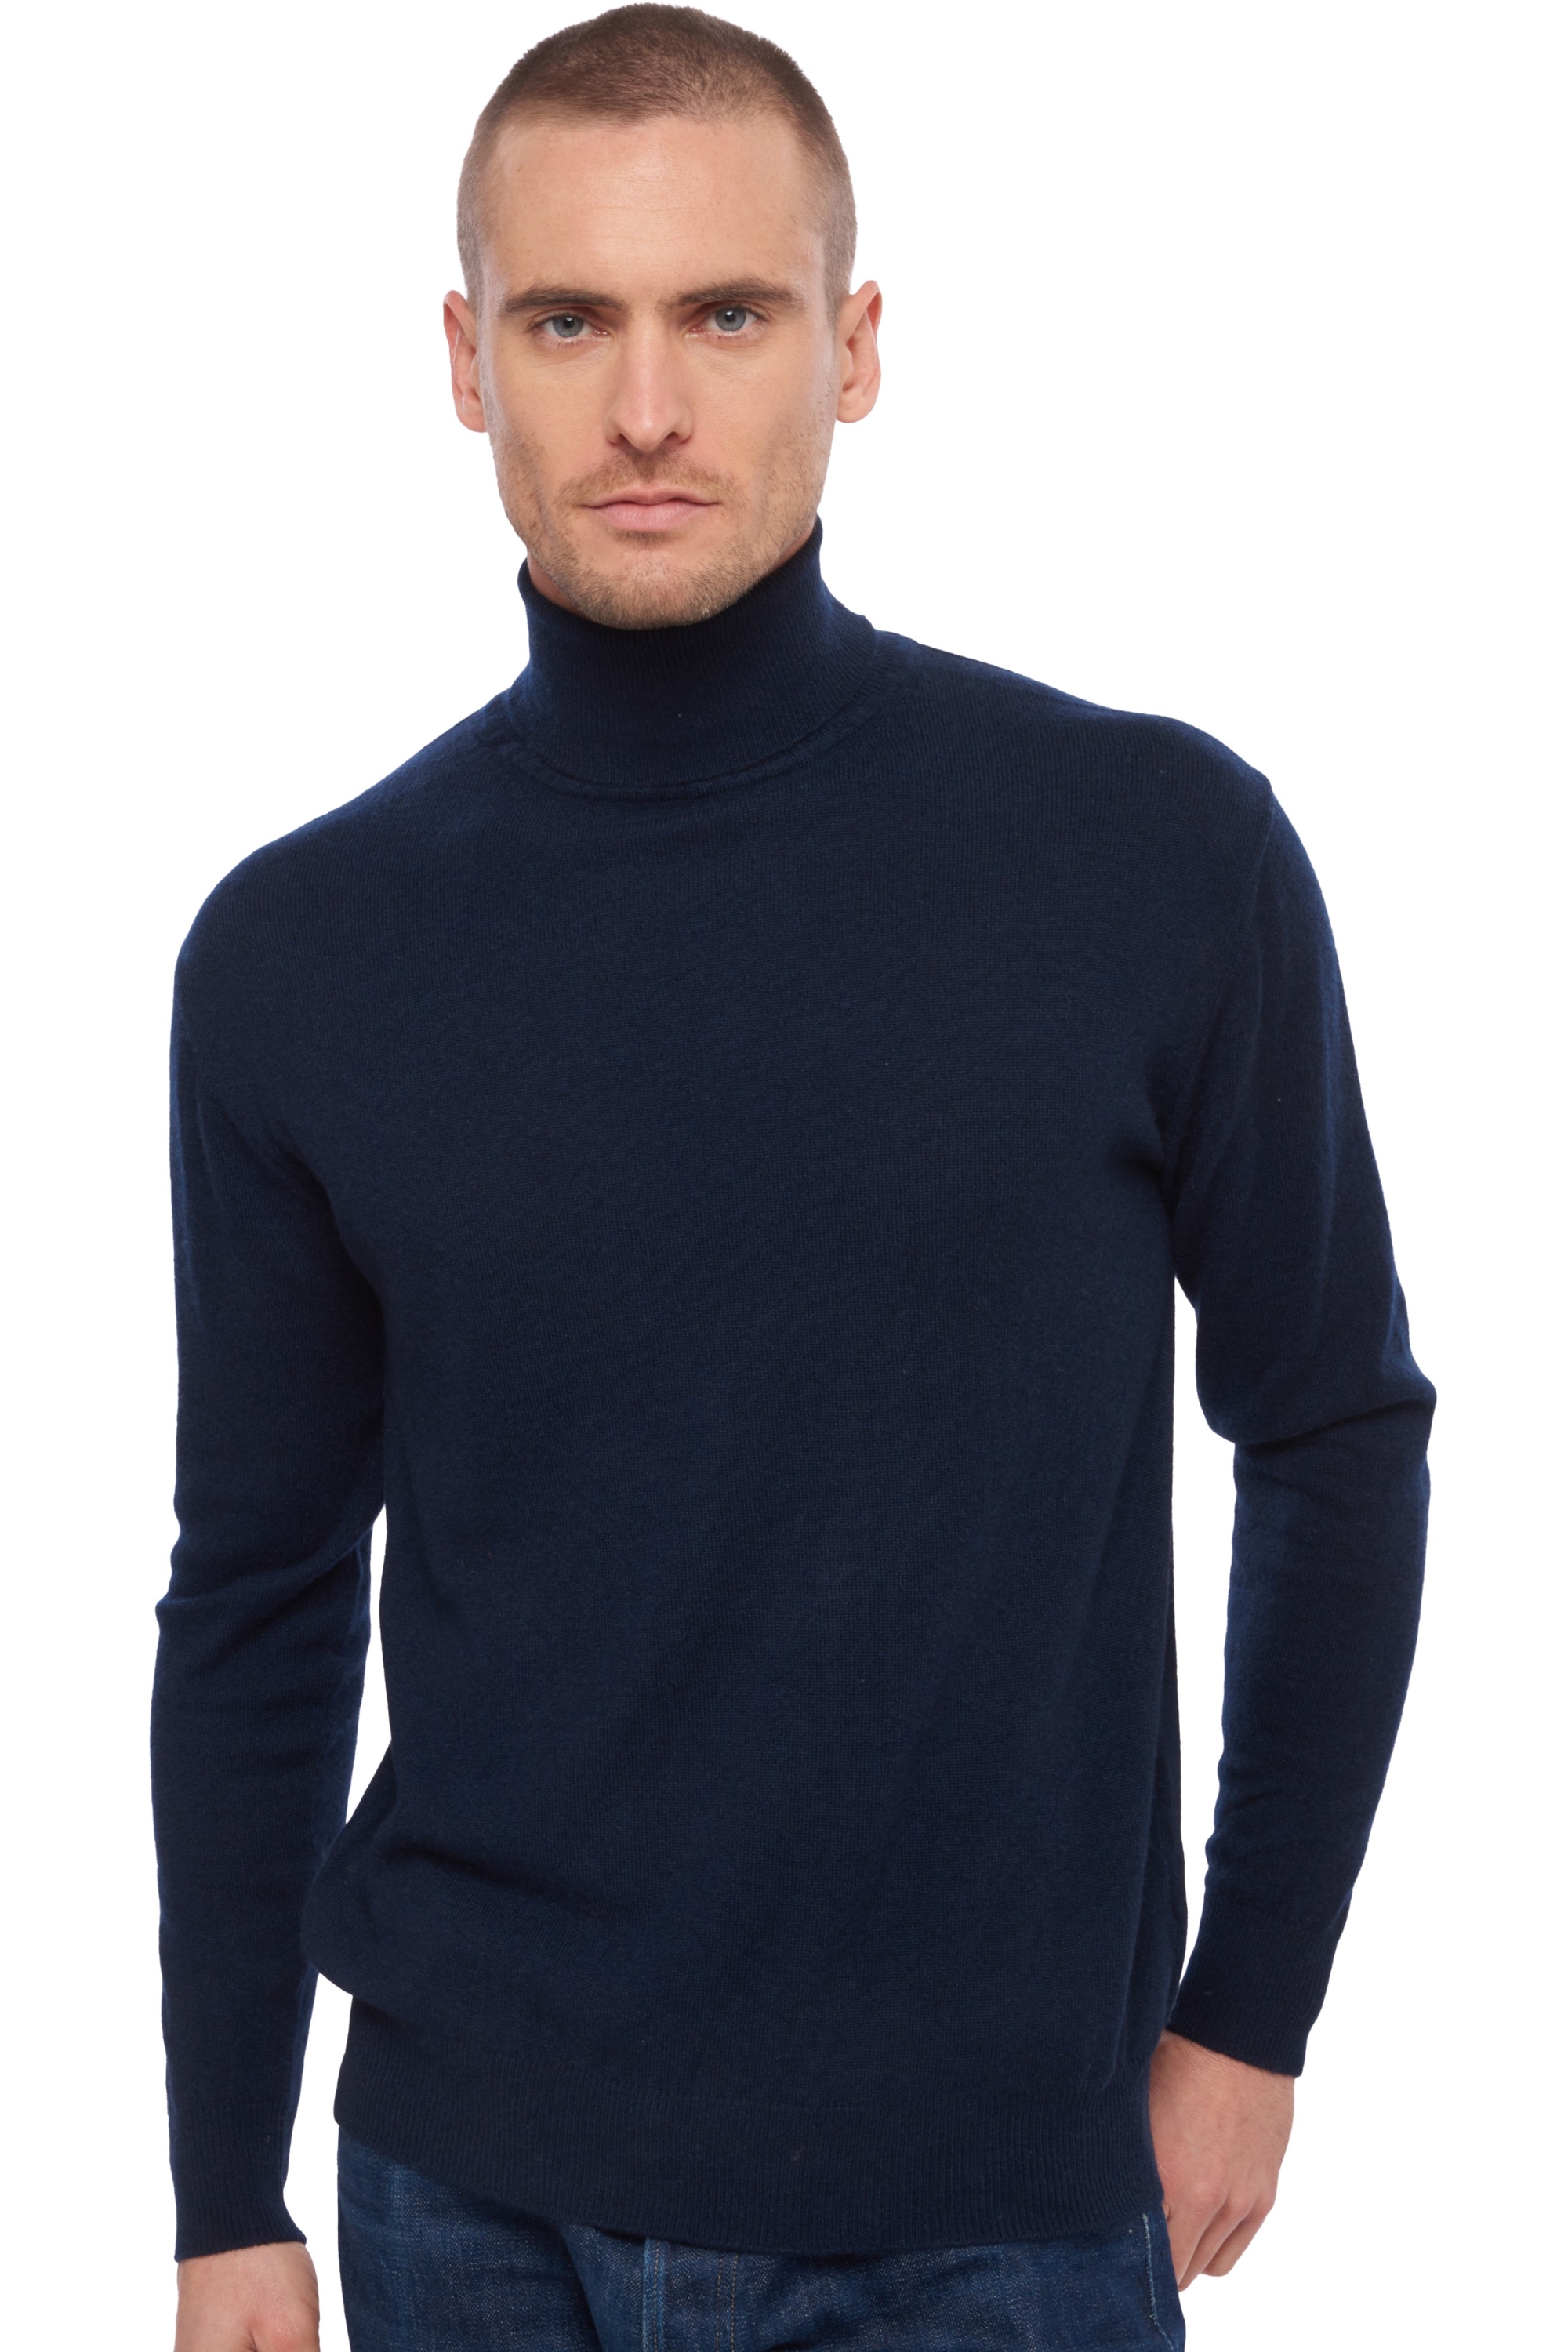 Cachemire pull homme col roule edgar marine fonce 2xl